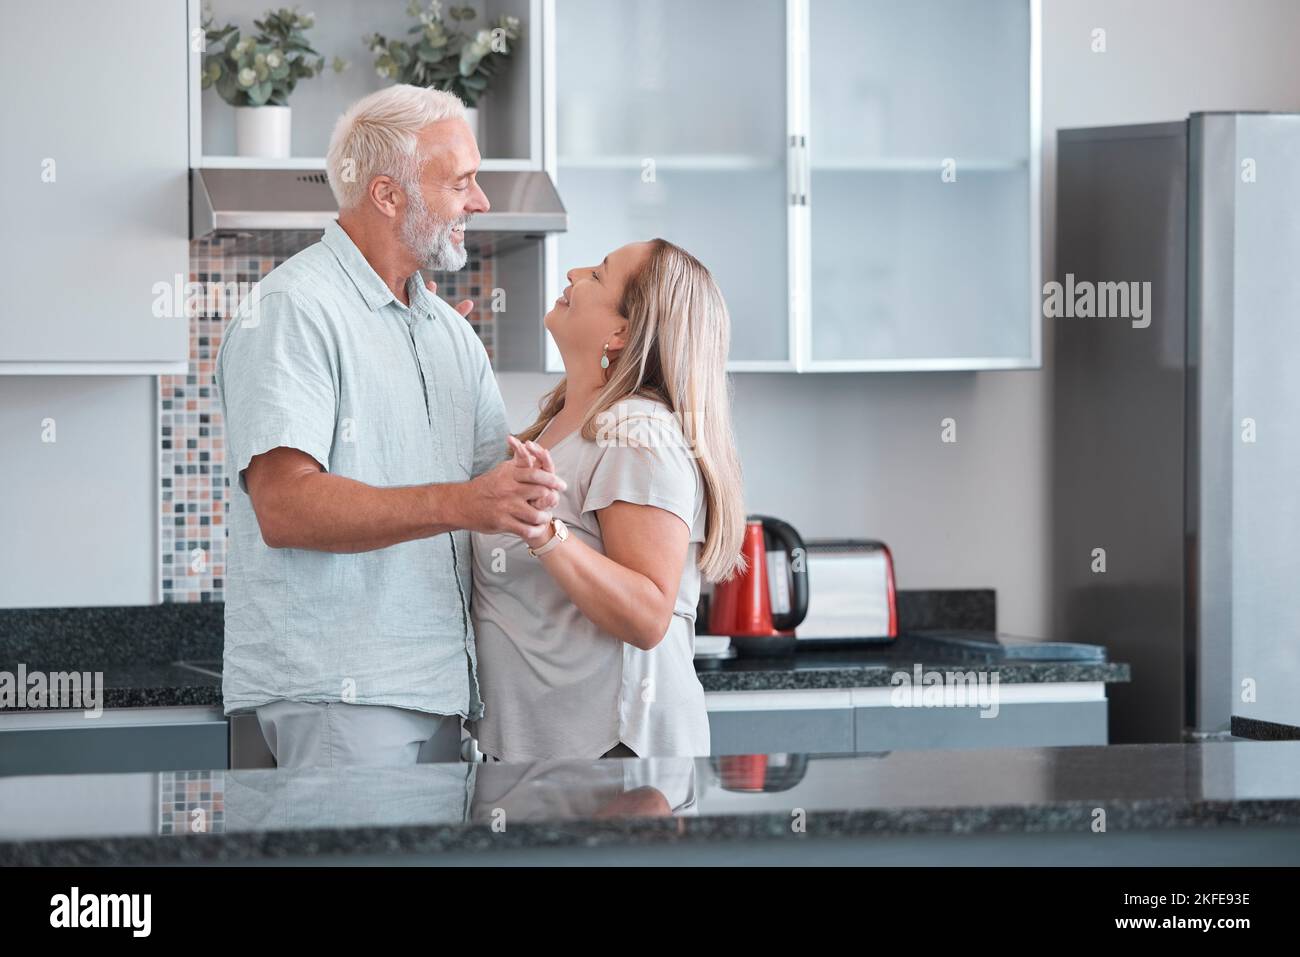 Love, dance and a senior couple in kitchen of home together enjoying weekend time and celebrate life with smile. Retirement, happiness and health, a Stock Photo